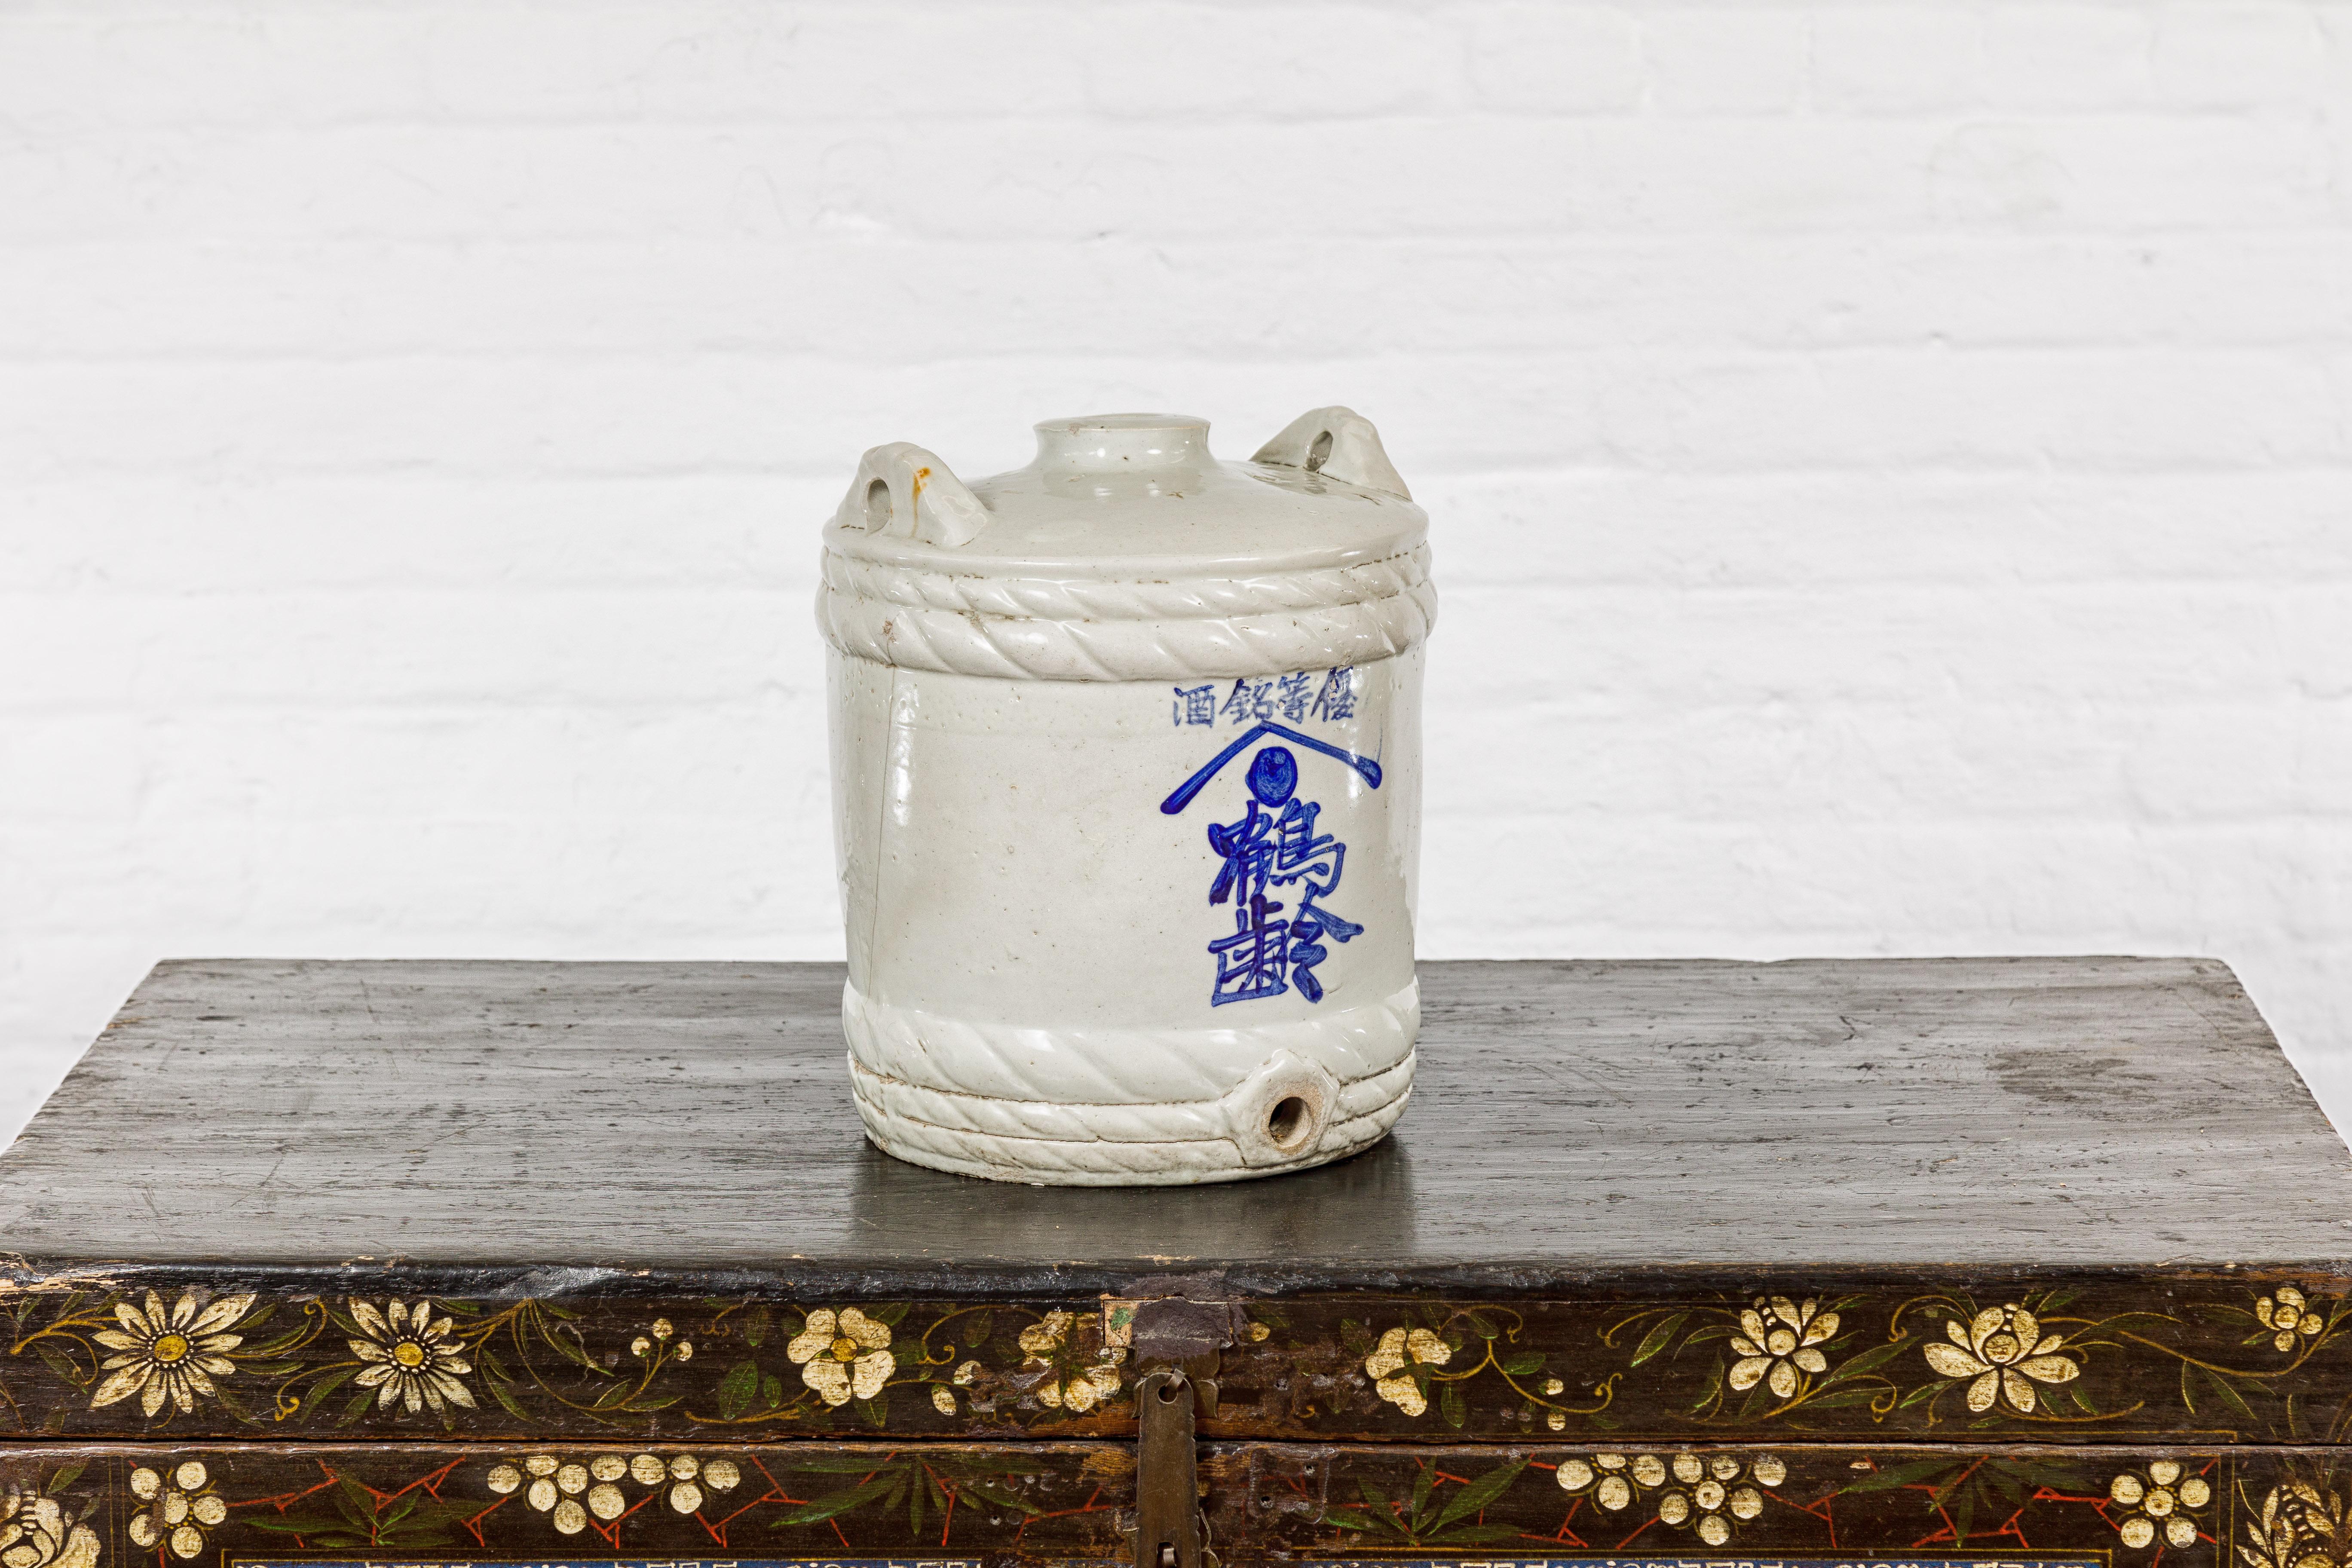 Japanese Meiji Period 19th Century Barrel Shaped Sake Jar with Calligraphy For Sale 6